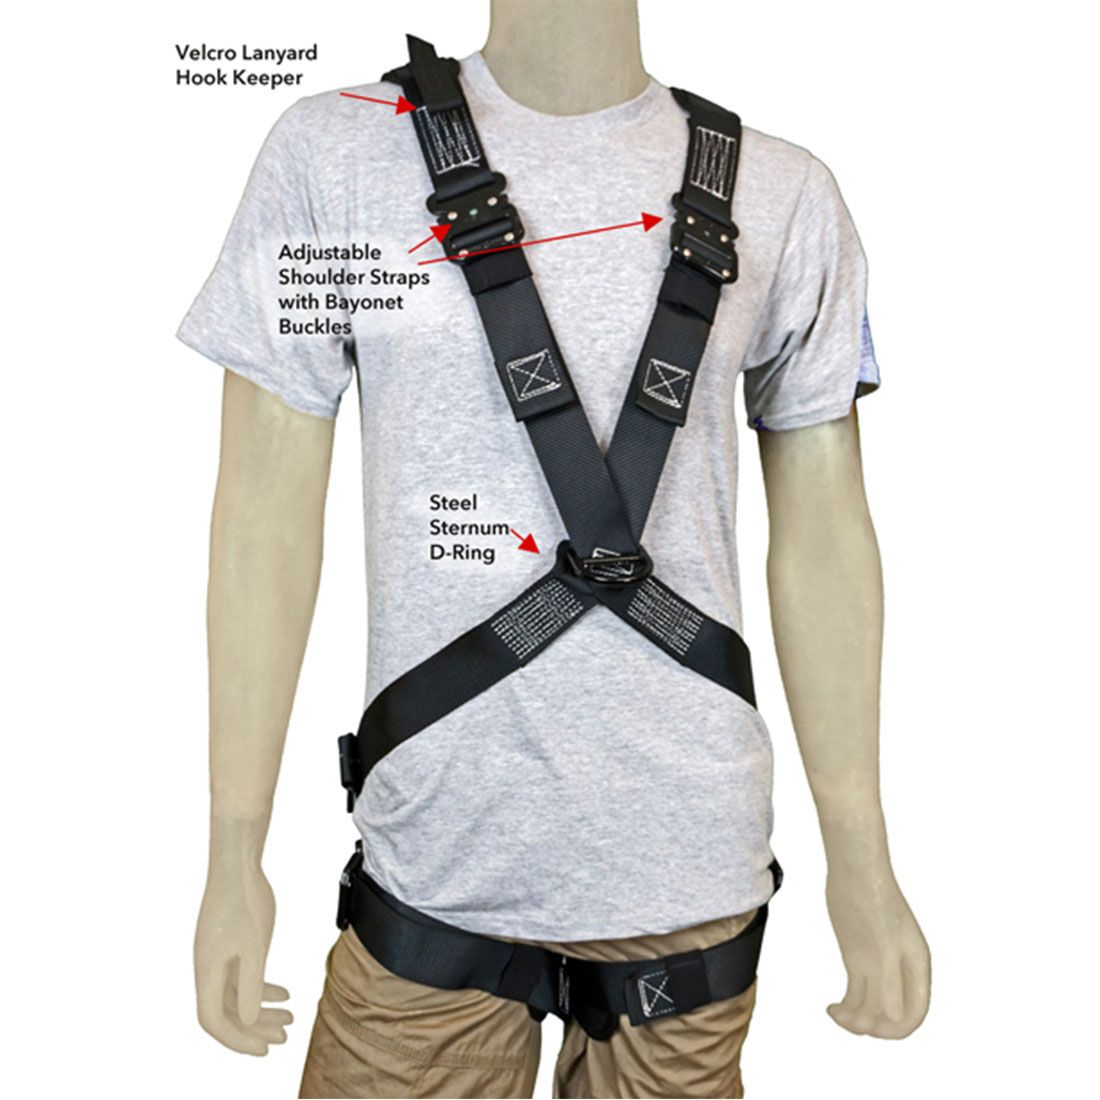 ProPlus Technician Theatrical Harness - X-Large (44